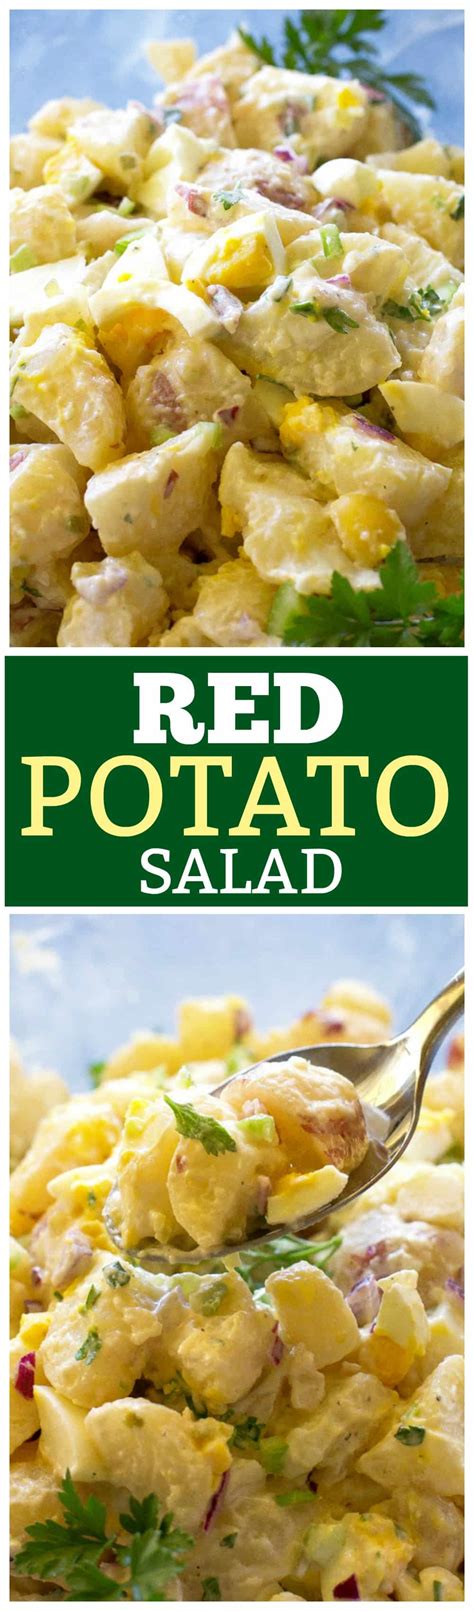 red-potato-salad-the-girl-who-ate-everything image